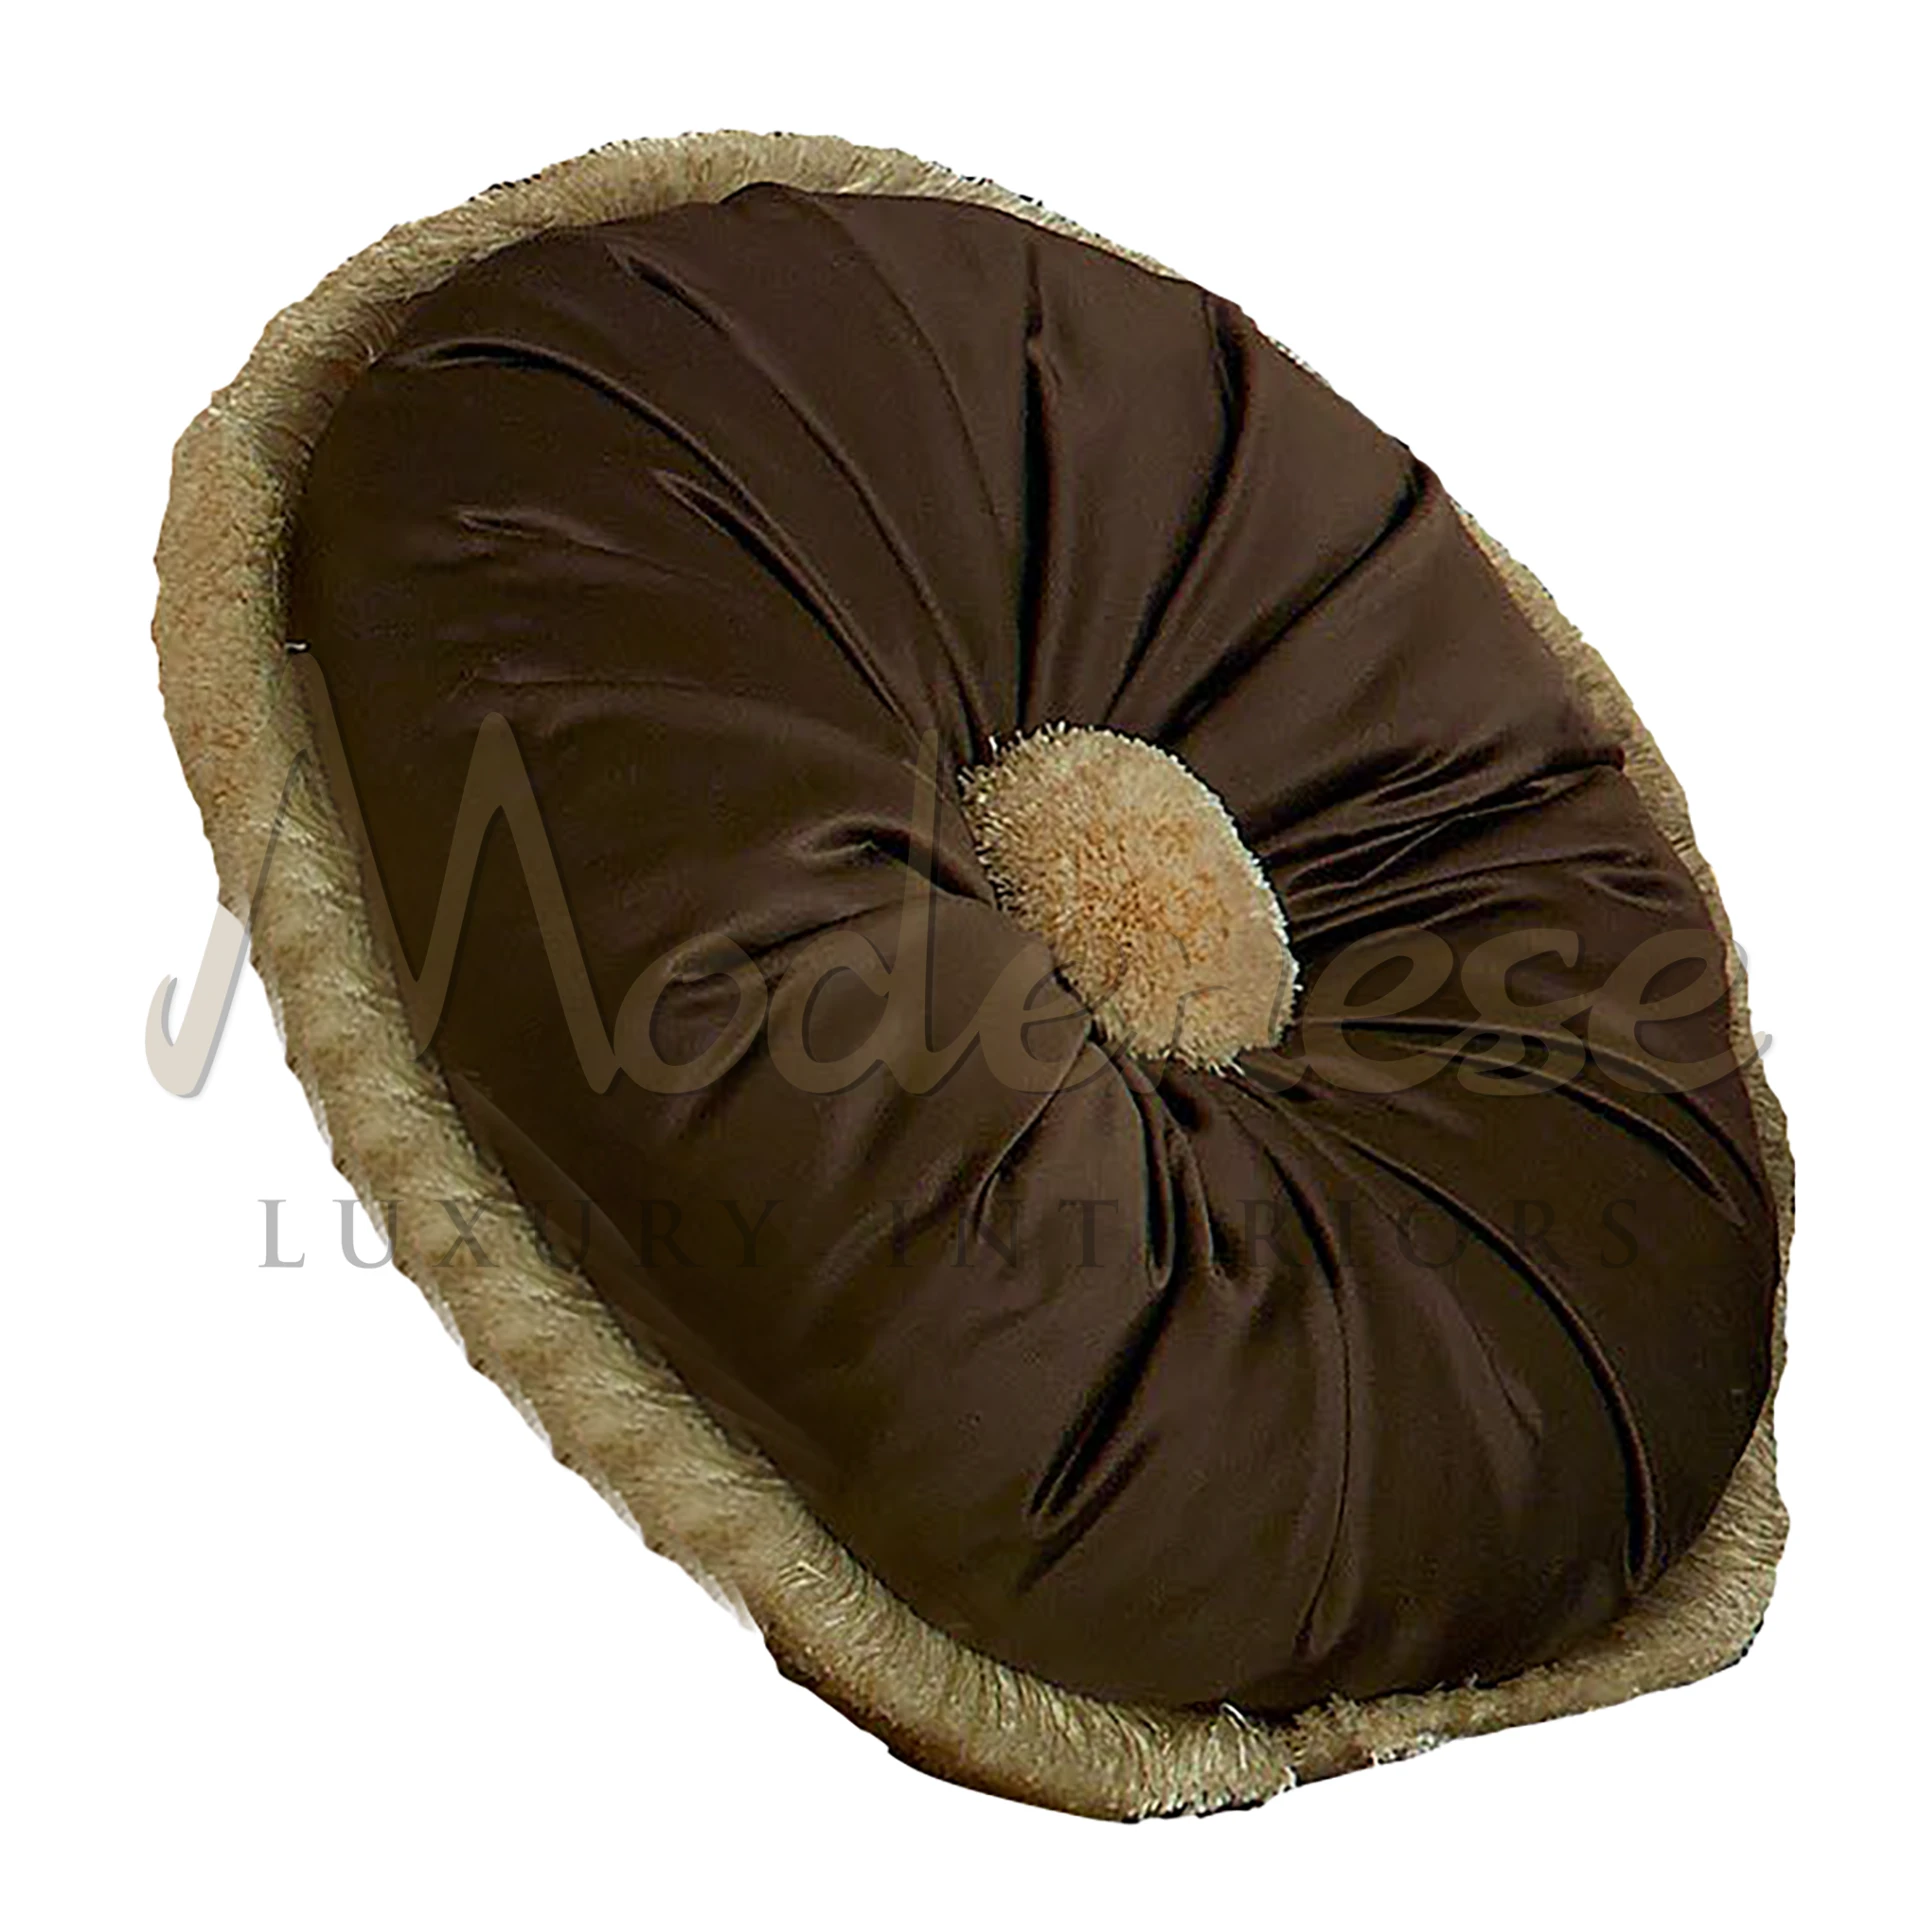 Royal Round Brown Pillow, a luxurious addition exuding grandeur on regal sofas, elegant armchairs, or sumptuous beds.